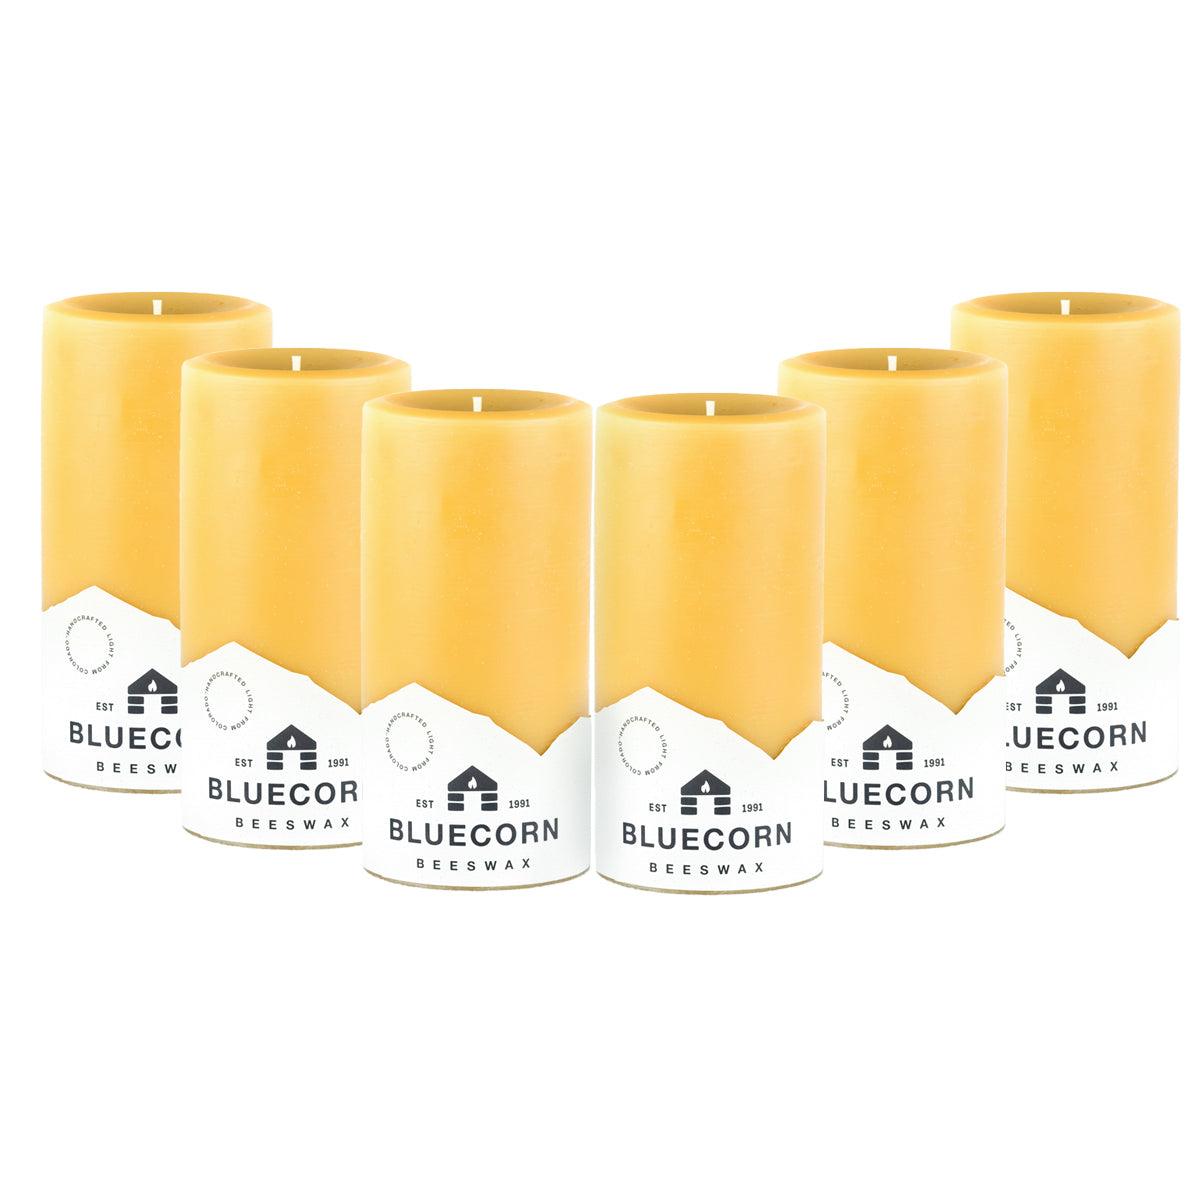 Bluecorn Beeswax 100% Raw Beeswax Candle in 50% Recycled Glass (3 Dia. x 5 Tall) 85 Hour Burn Time (1, Clear)